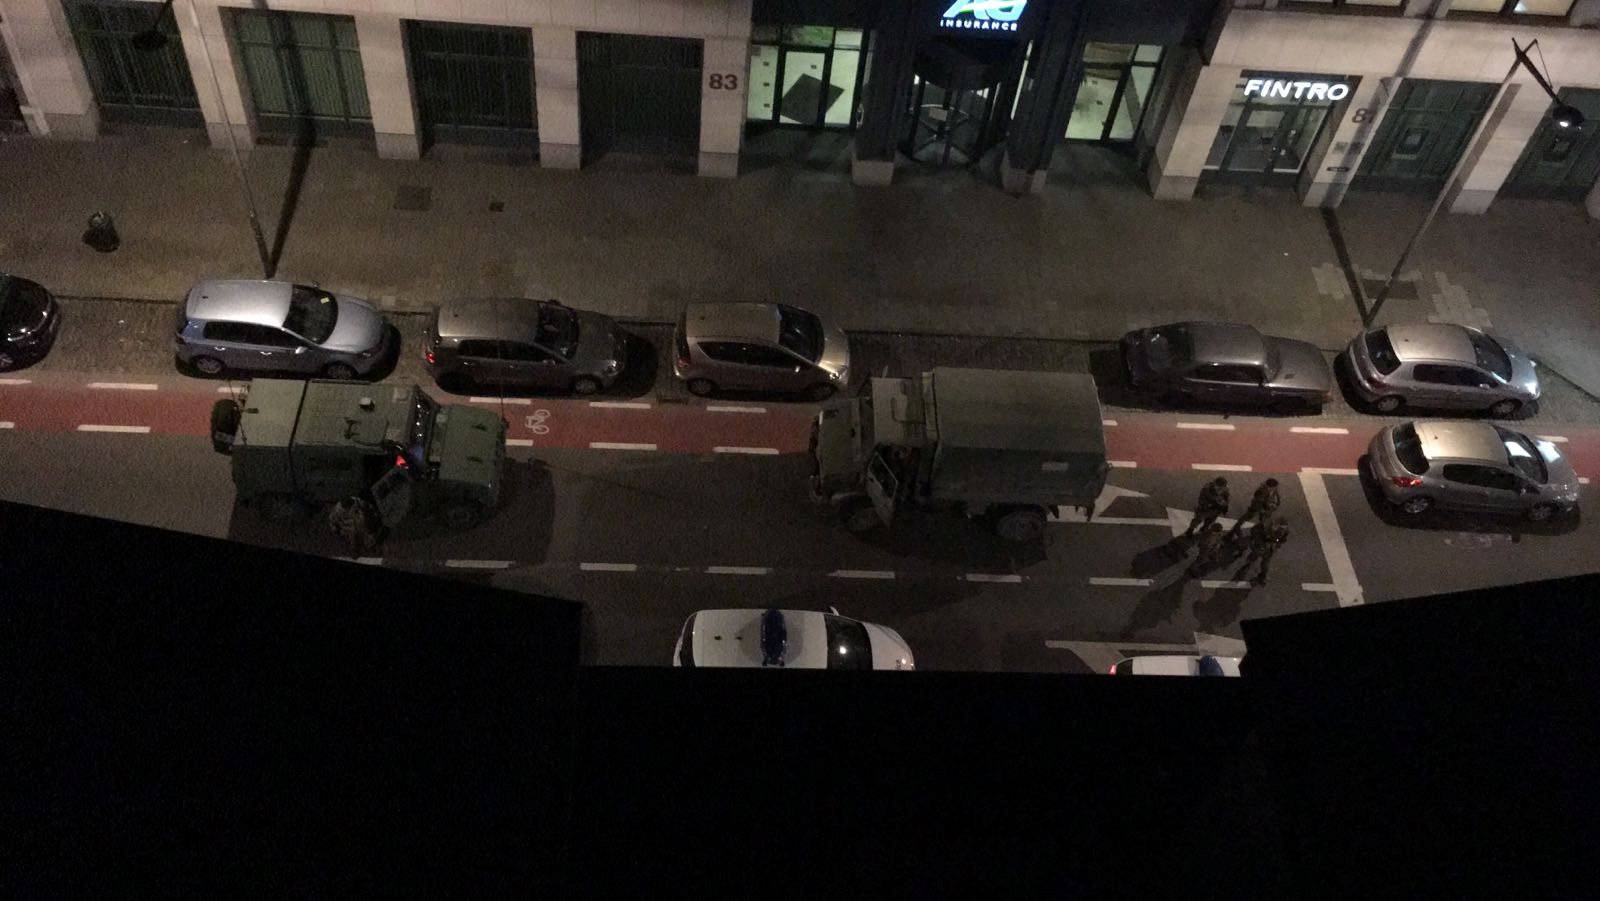 Belgian soldiers are seen at the scene where a man attacked two soldiers with a knife in Brussels